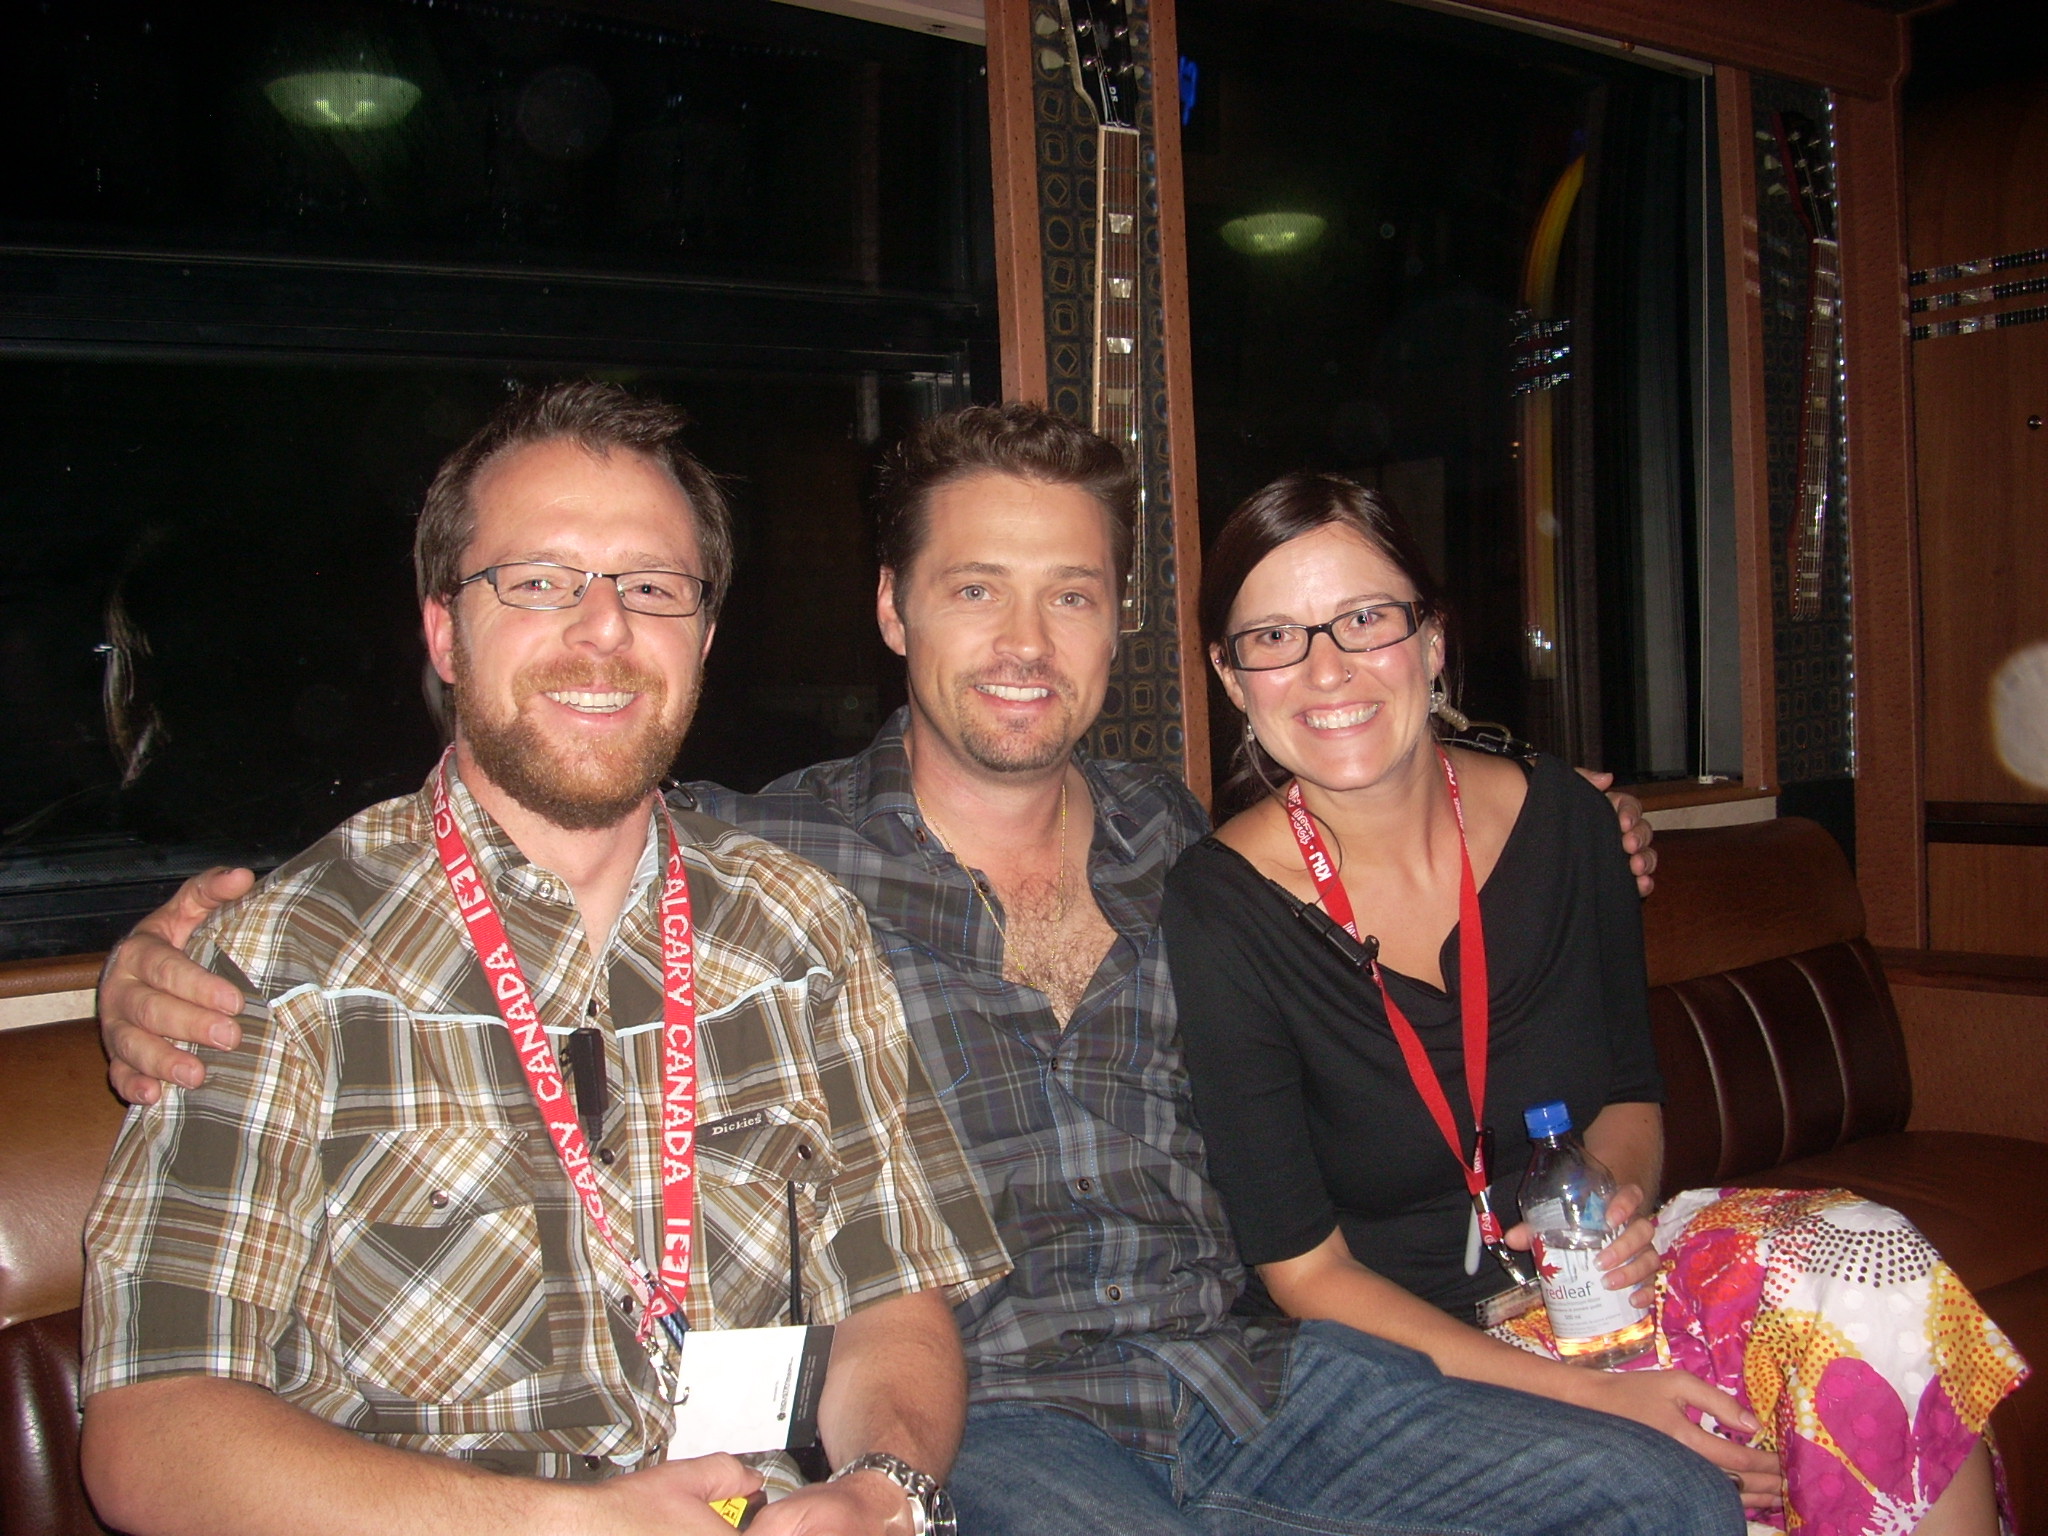 Gary Lorimer, Jason Priestley, Melissa Smith. Backstage at the Canadian Country Music Awards in Vancouver, B.C., Canada (Sept. 2009)